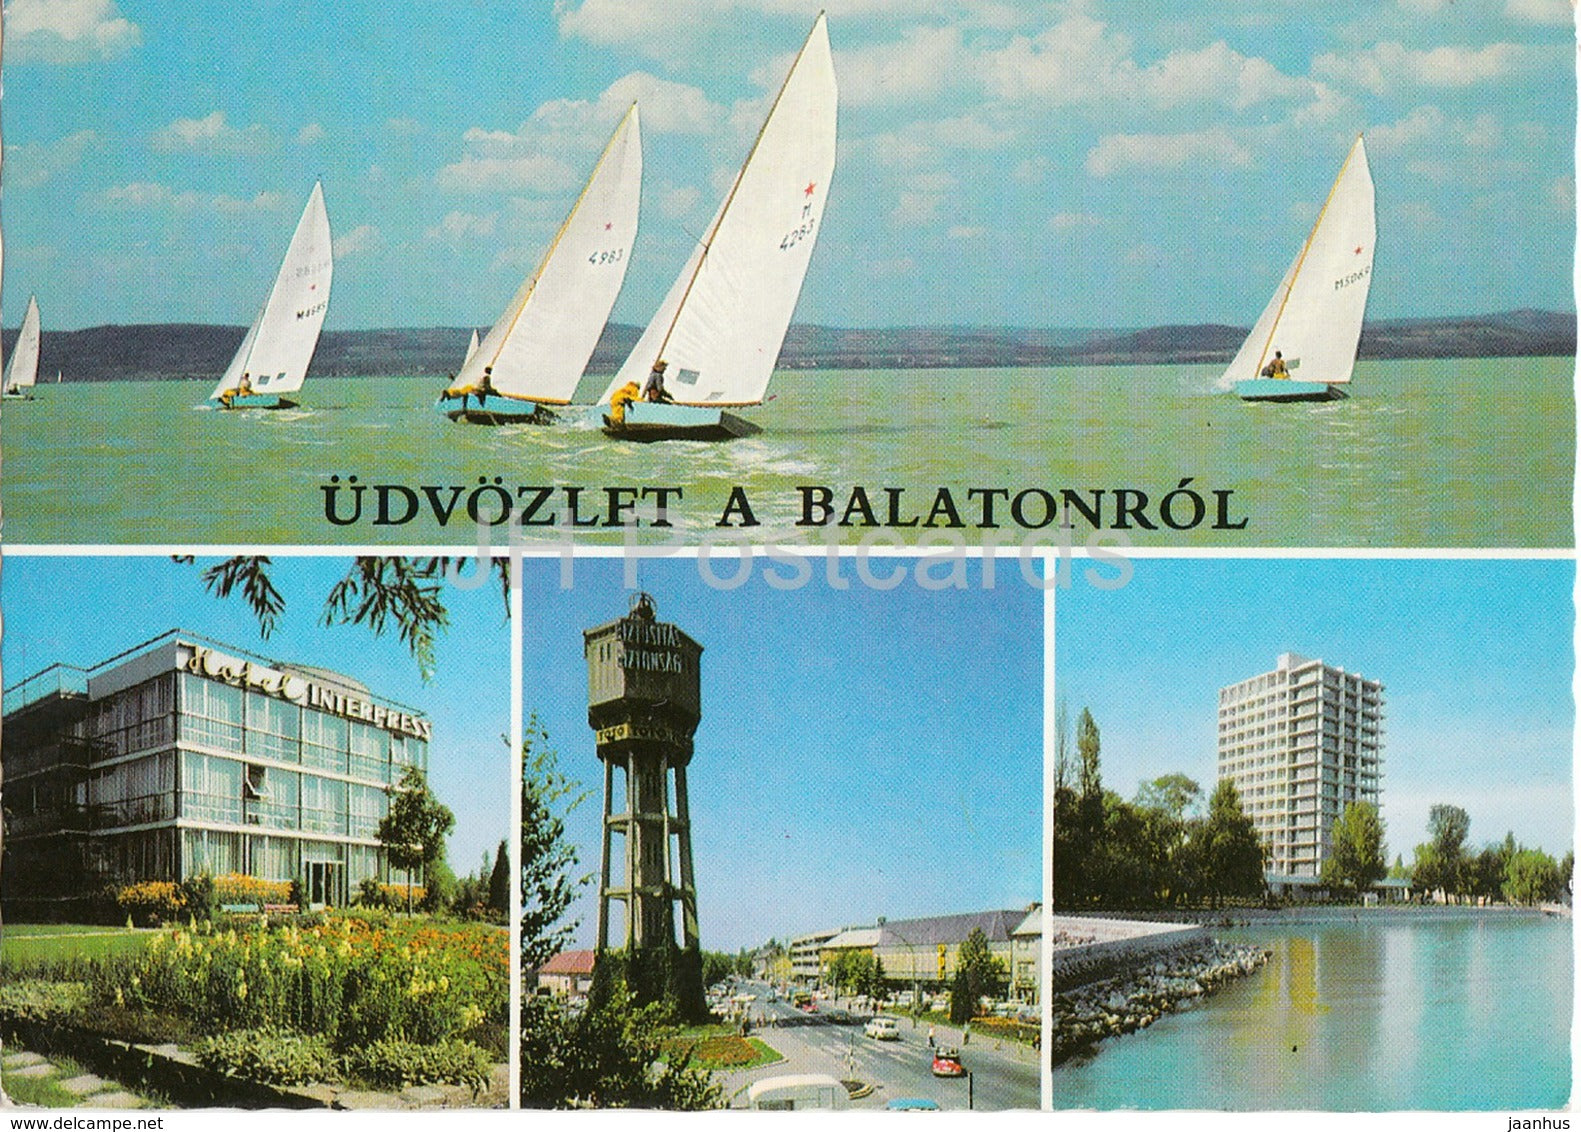 Greetings from the lake Balaton - sailing boat - hotel - lighthouse - multiview - 1979 - Hungary - used - JH Postcards